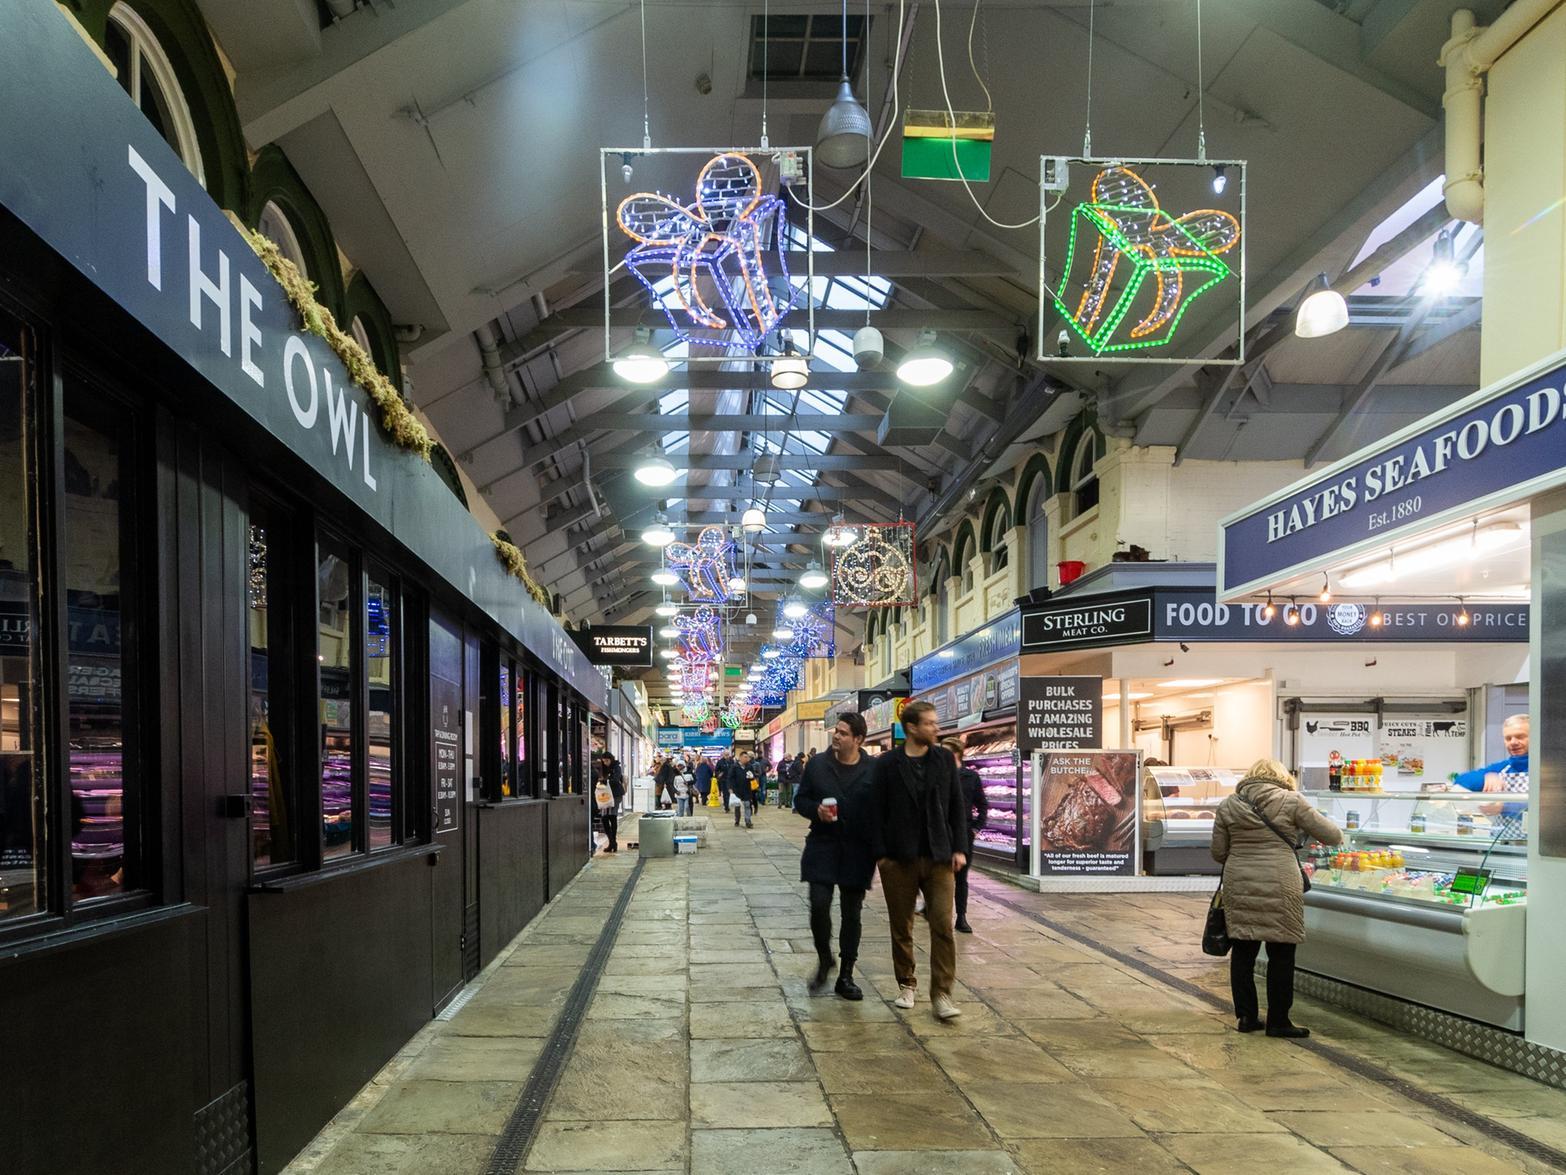 A pub opened inside Kirkgate Market in Leeds for the first time in its 150 year history. Gastro pub The Owl, located on Fish & Game Row, officially opened its doors after months of excitement.